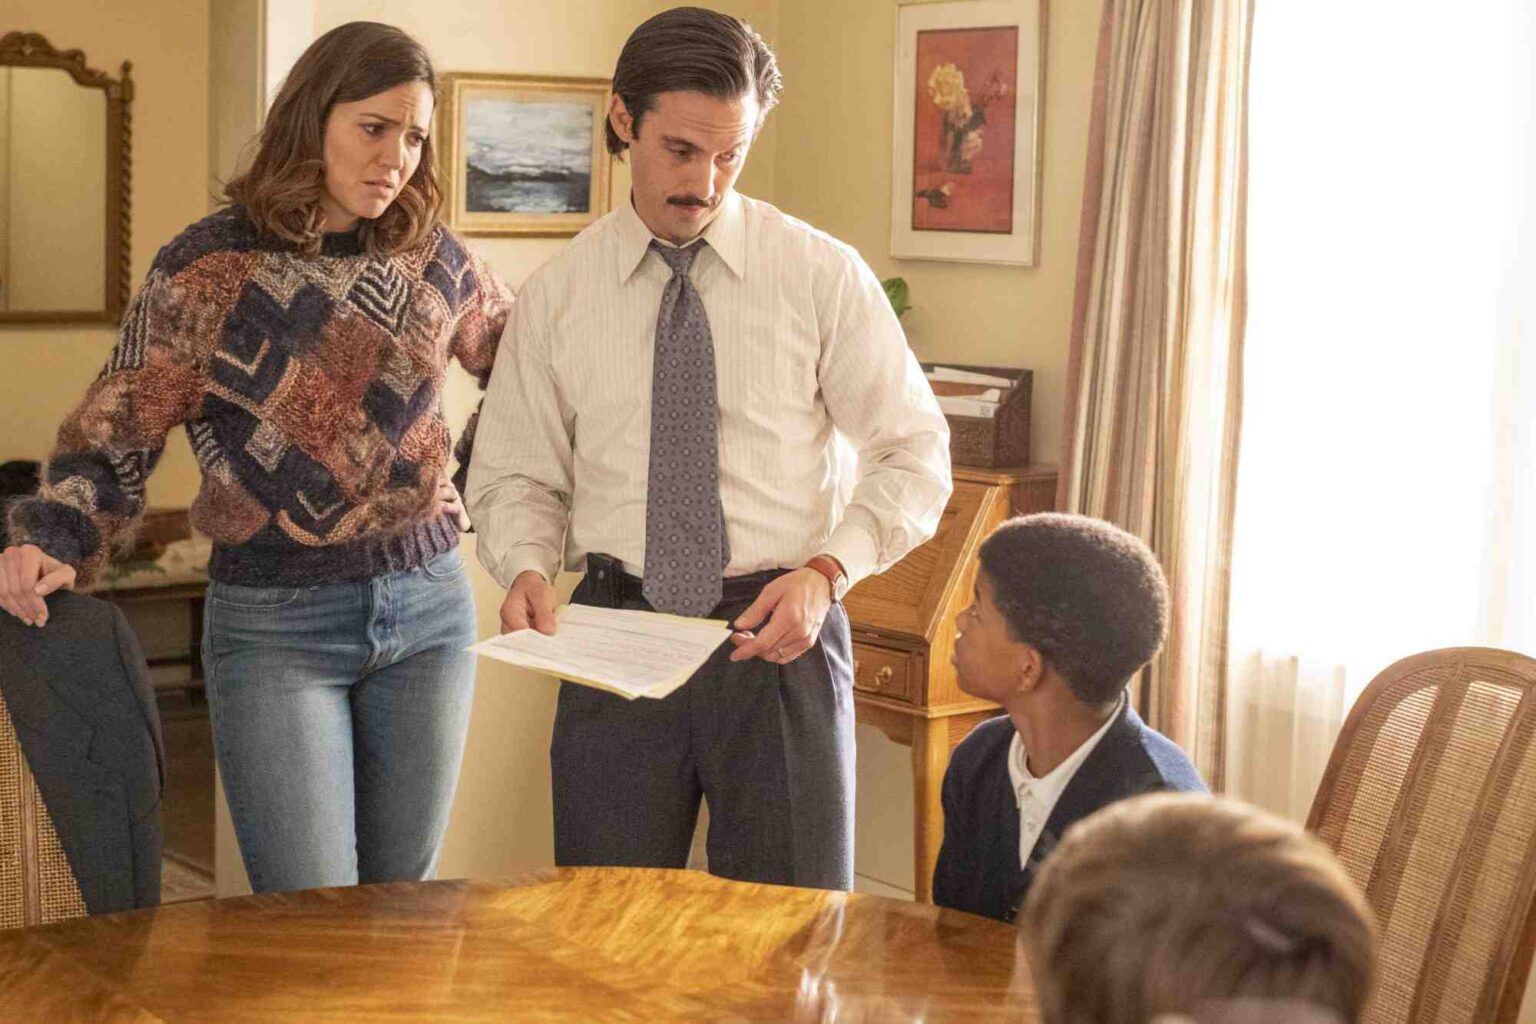 Are you sad for the end of 'This Is Us' on NBC? Prepare yourself to buy tissues in bulk with this latest news on the series final season.